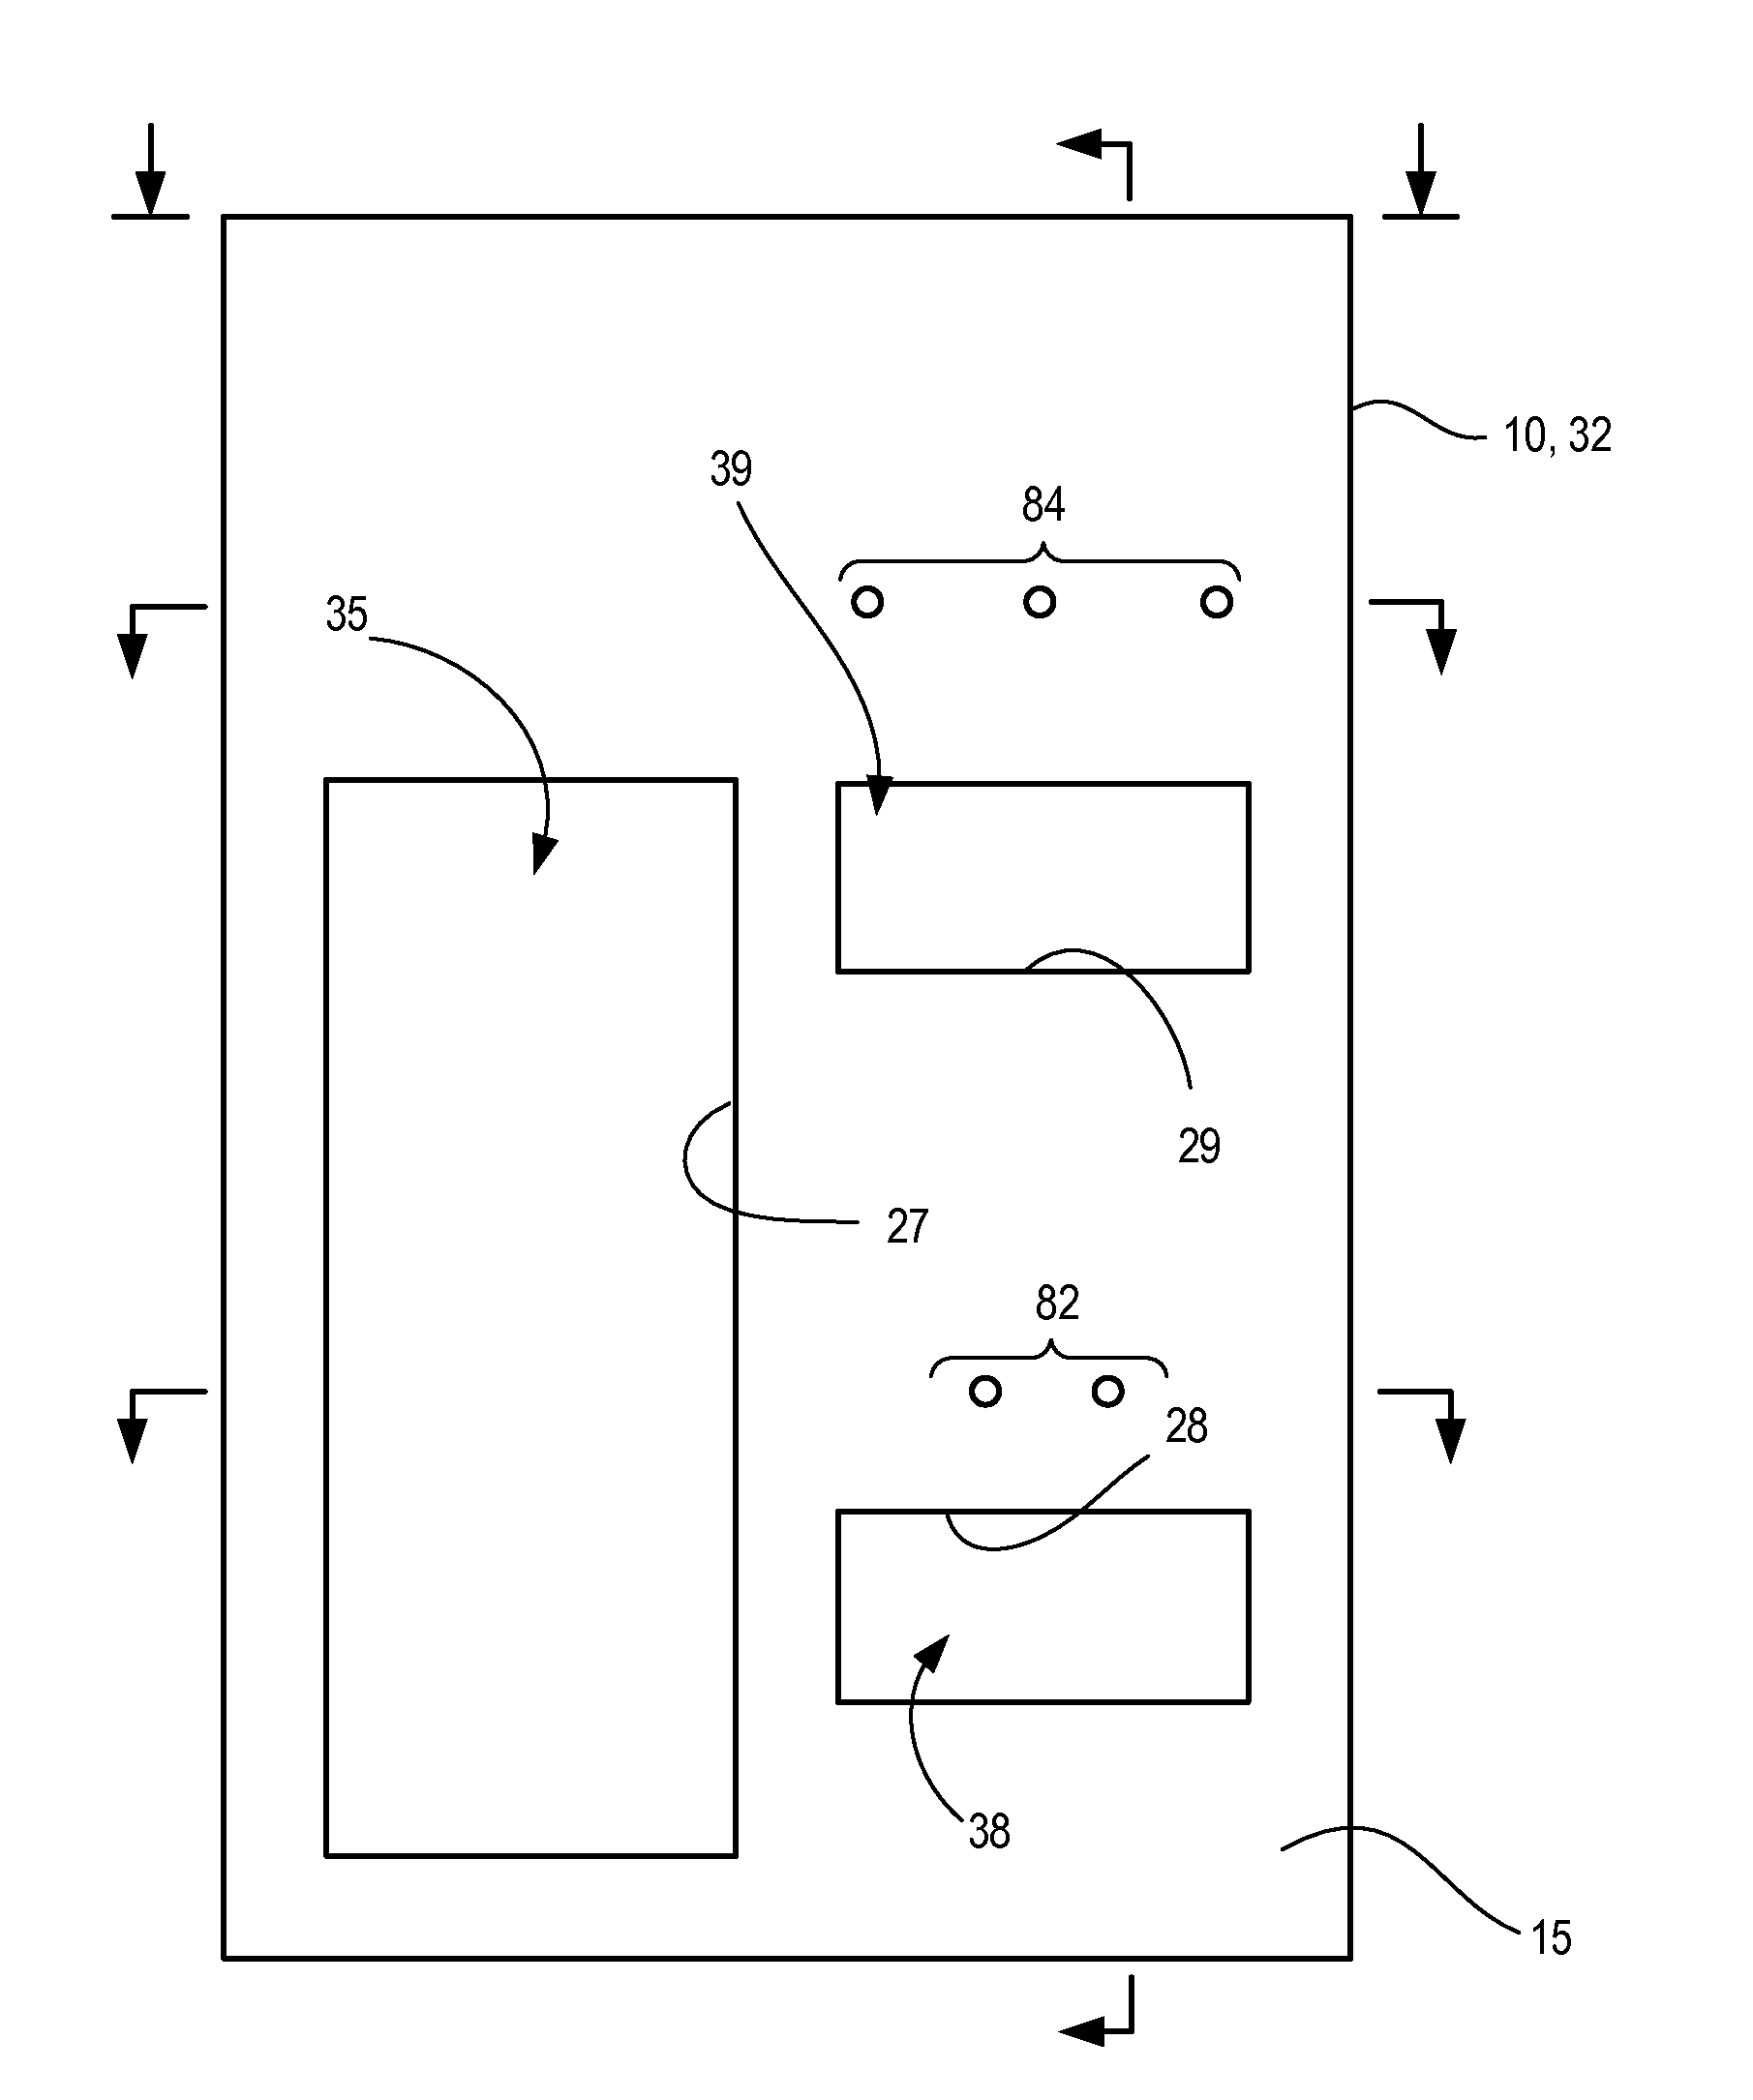 Methods and Systems for Water Delivery in an Additive Dispenser